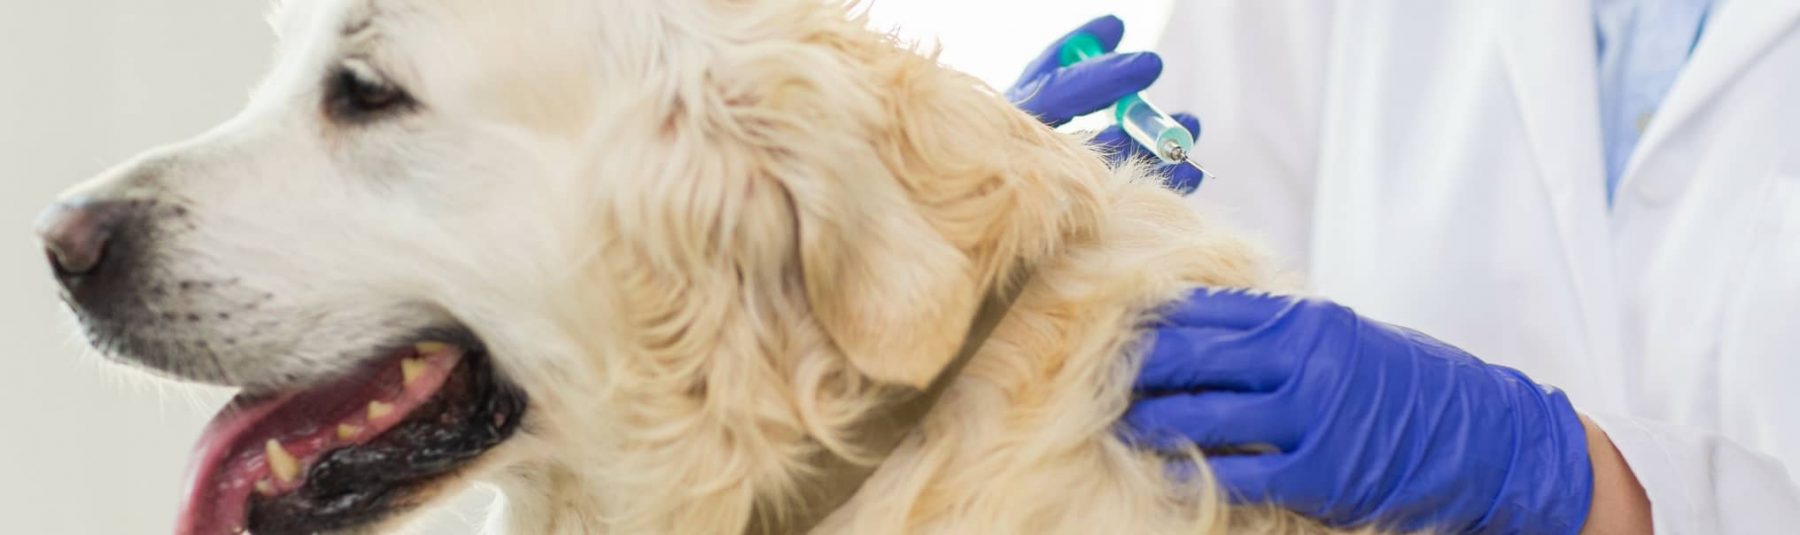 Vaccination Service for Dogs